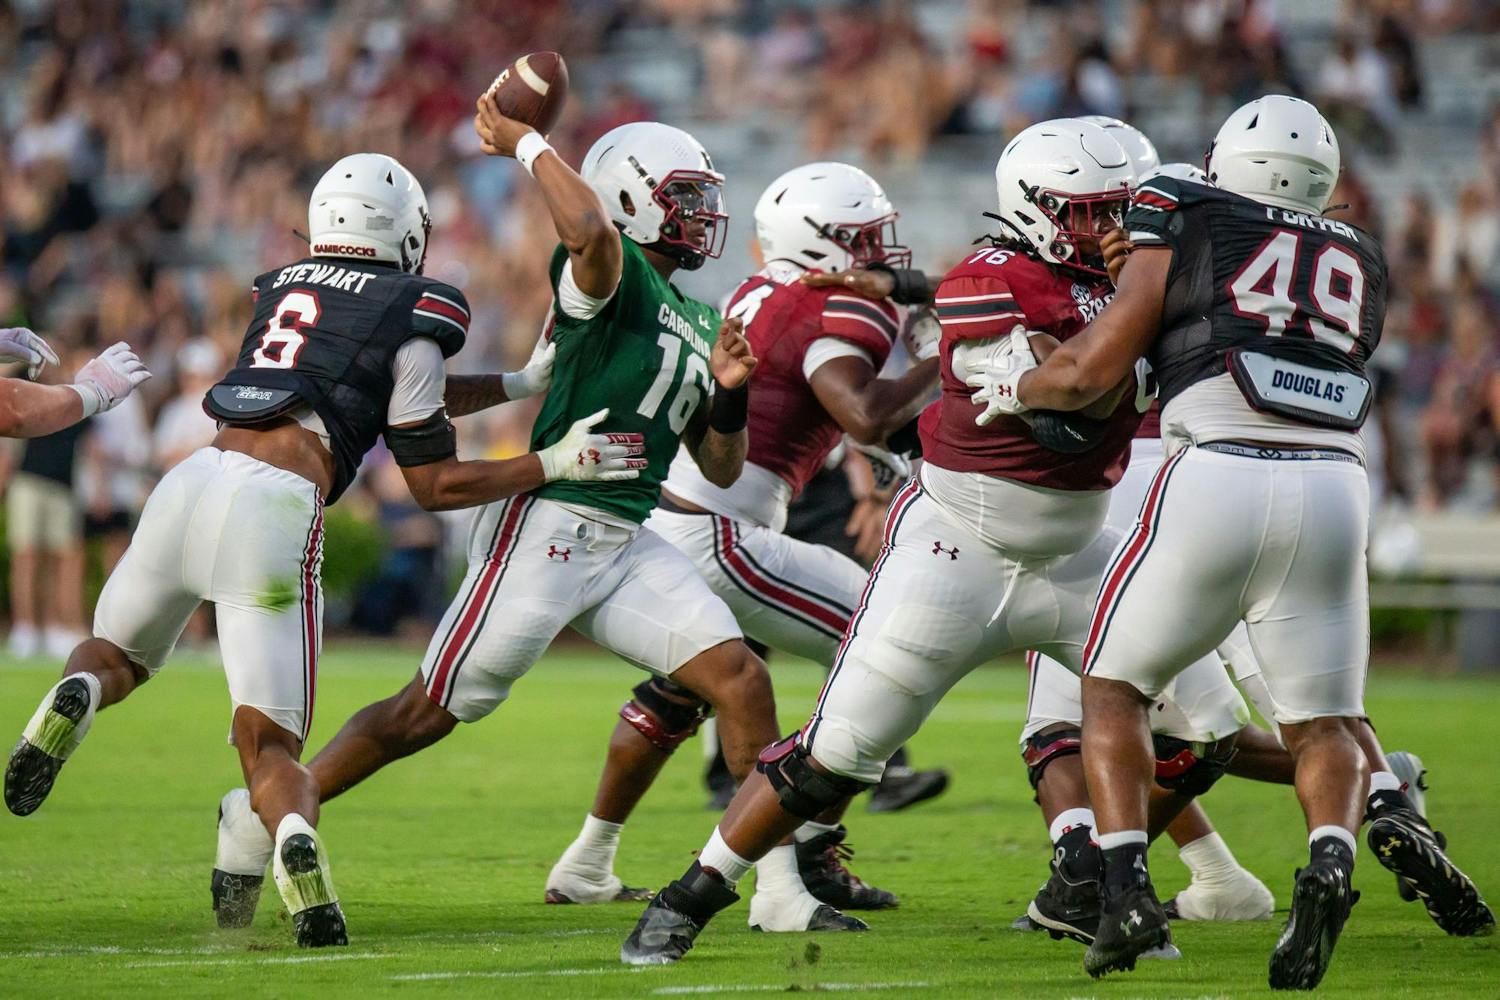 More than 32,000 fans gathered in Columbia to watch South Carolina football compete in the 2024 Garnet &amp; Black Spring Game at Williams-Brice Stadium on April 20, 2024. The Garnet team rushed to an early lead in the first drive of the game and ultimately defeated the Black team 17-0.